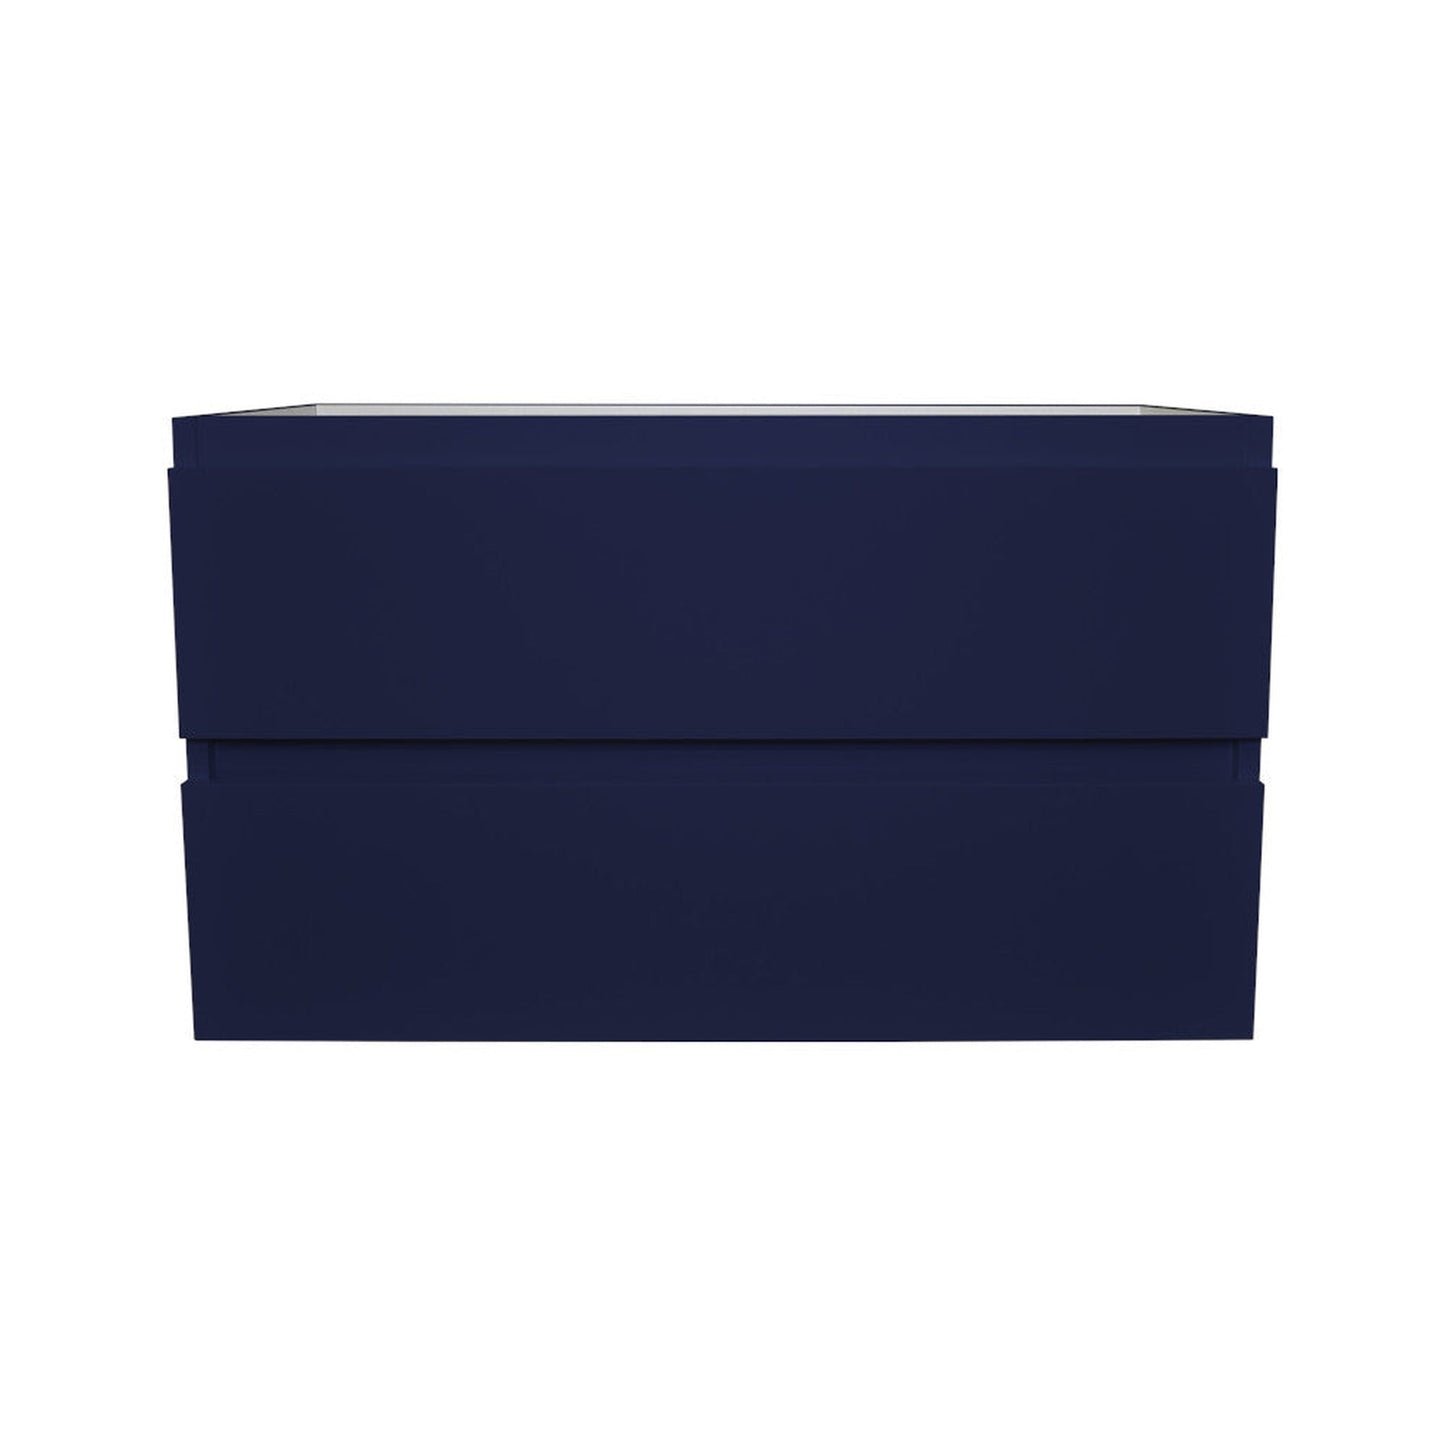 Volpa USA Salt 36" x 18" Navy Wall-Mounted Floating Bathroom Vanity Cabinet with Drawers